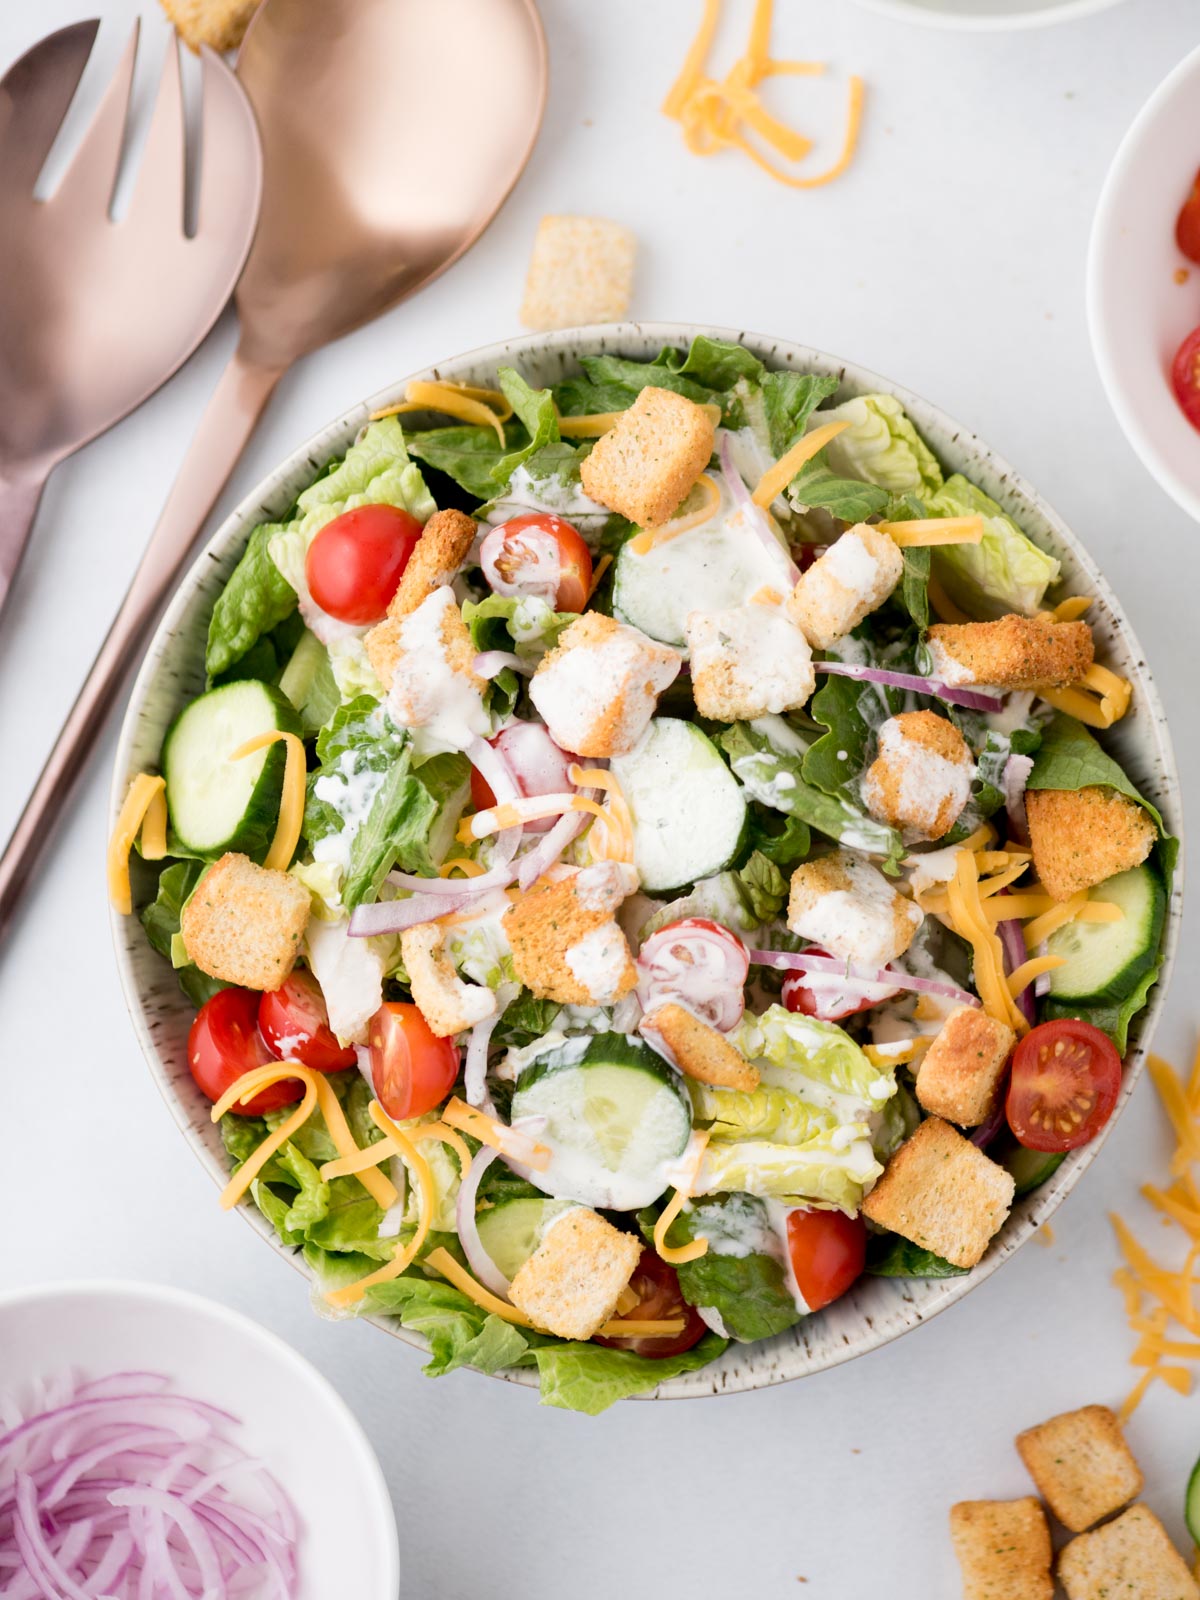 house salad in a bowl topped with ranch dressing, surrounded by servings utensils and toppings